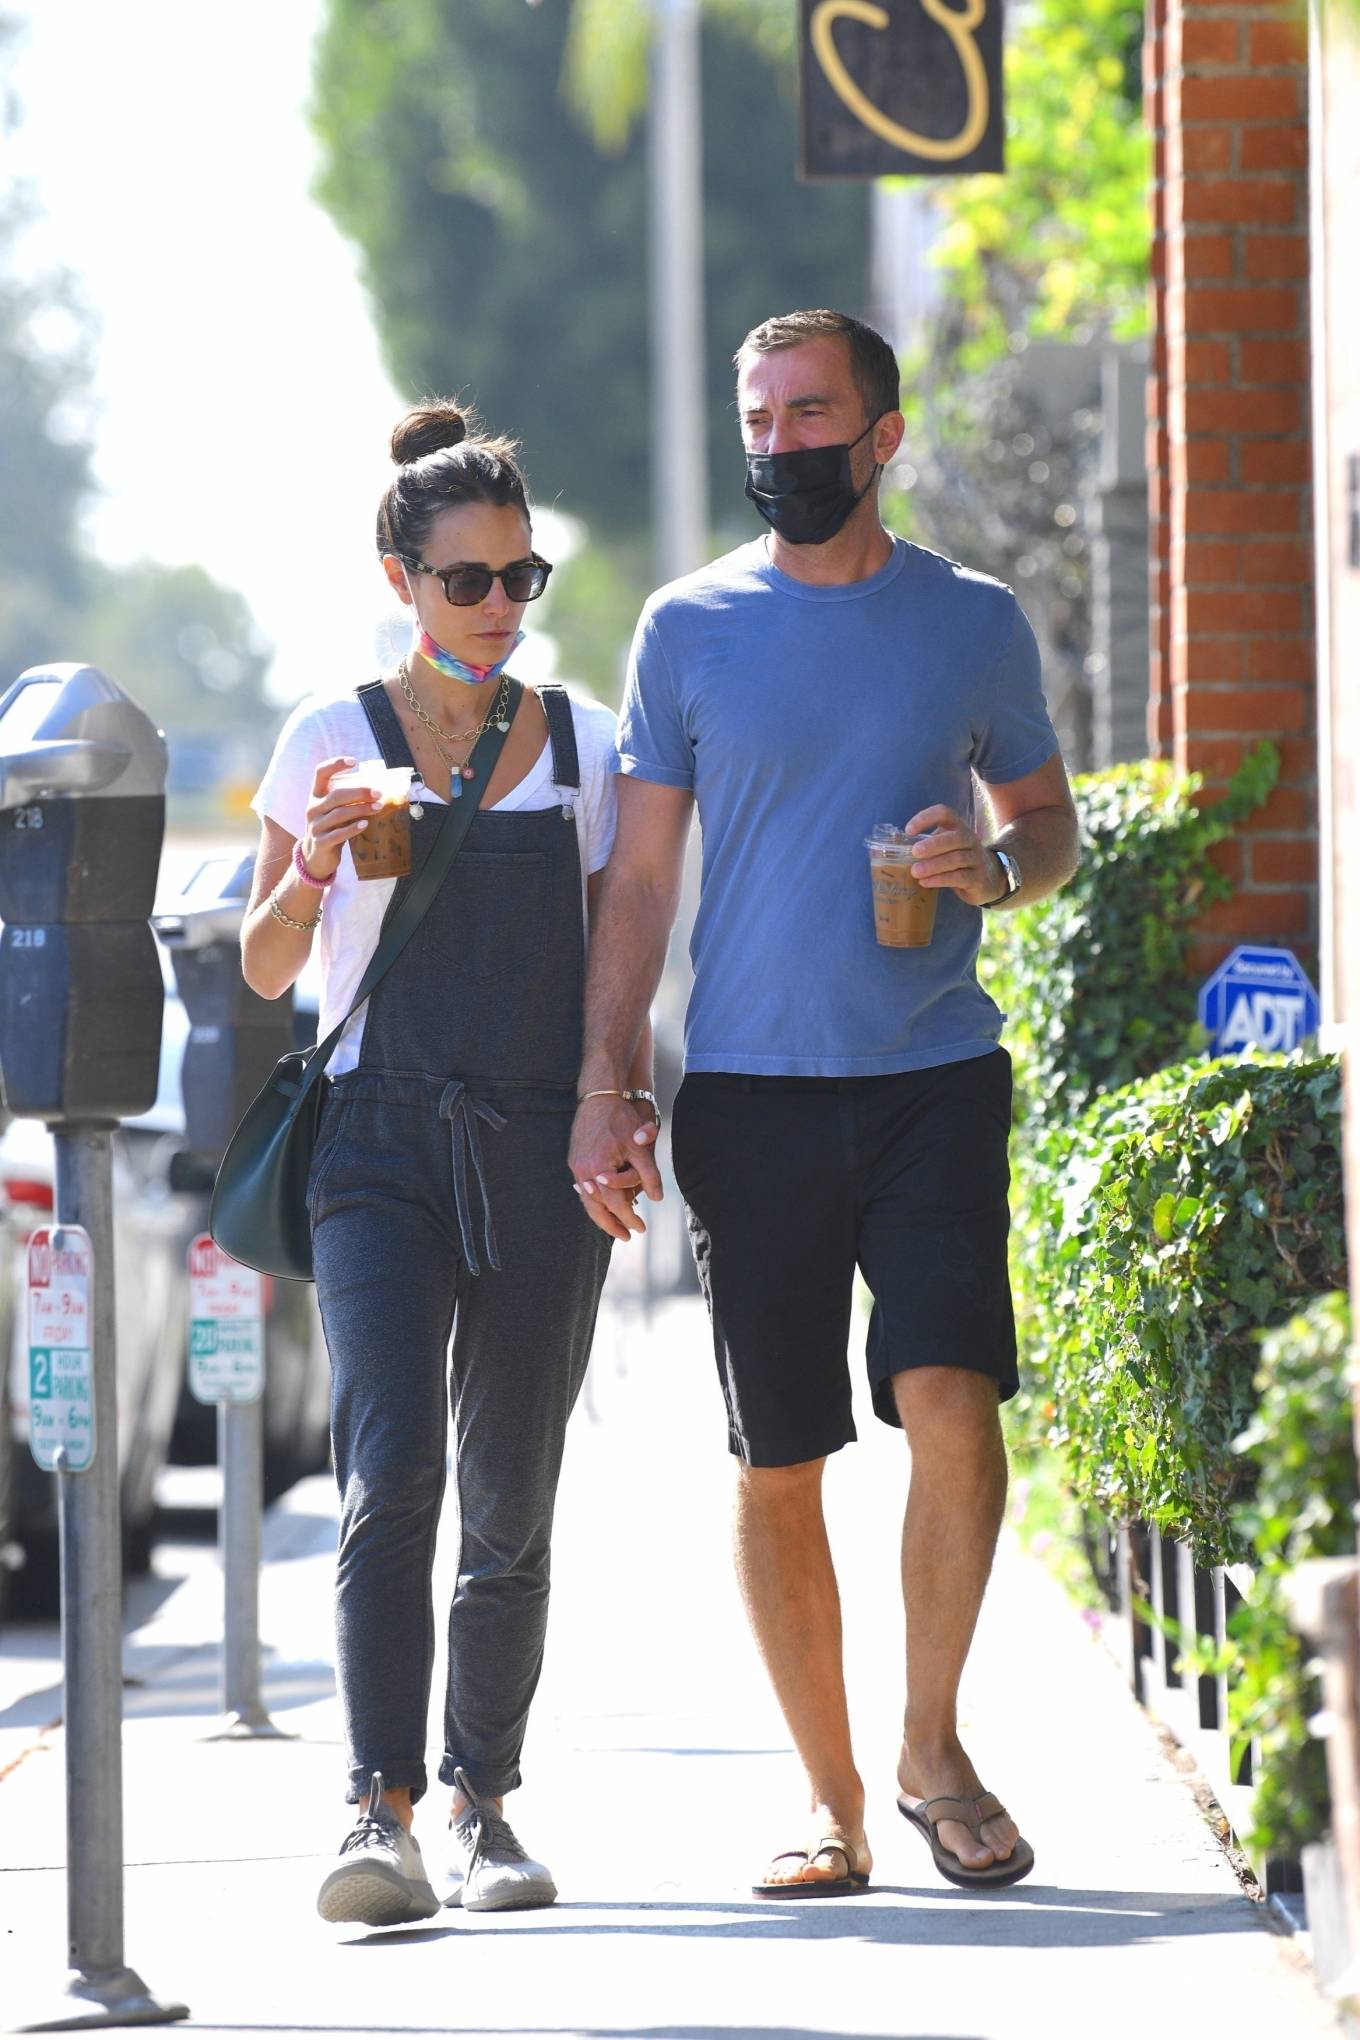 Jordana Brewster 2021 : Jordana Brewster – spotted out and about in Brentwood-10